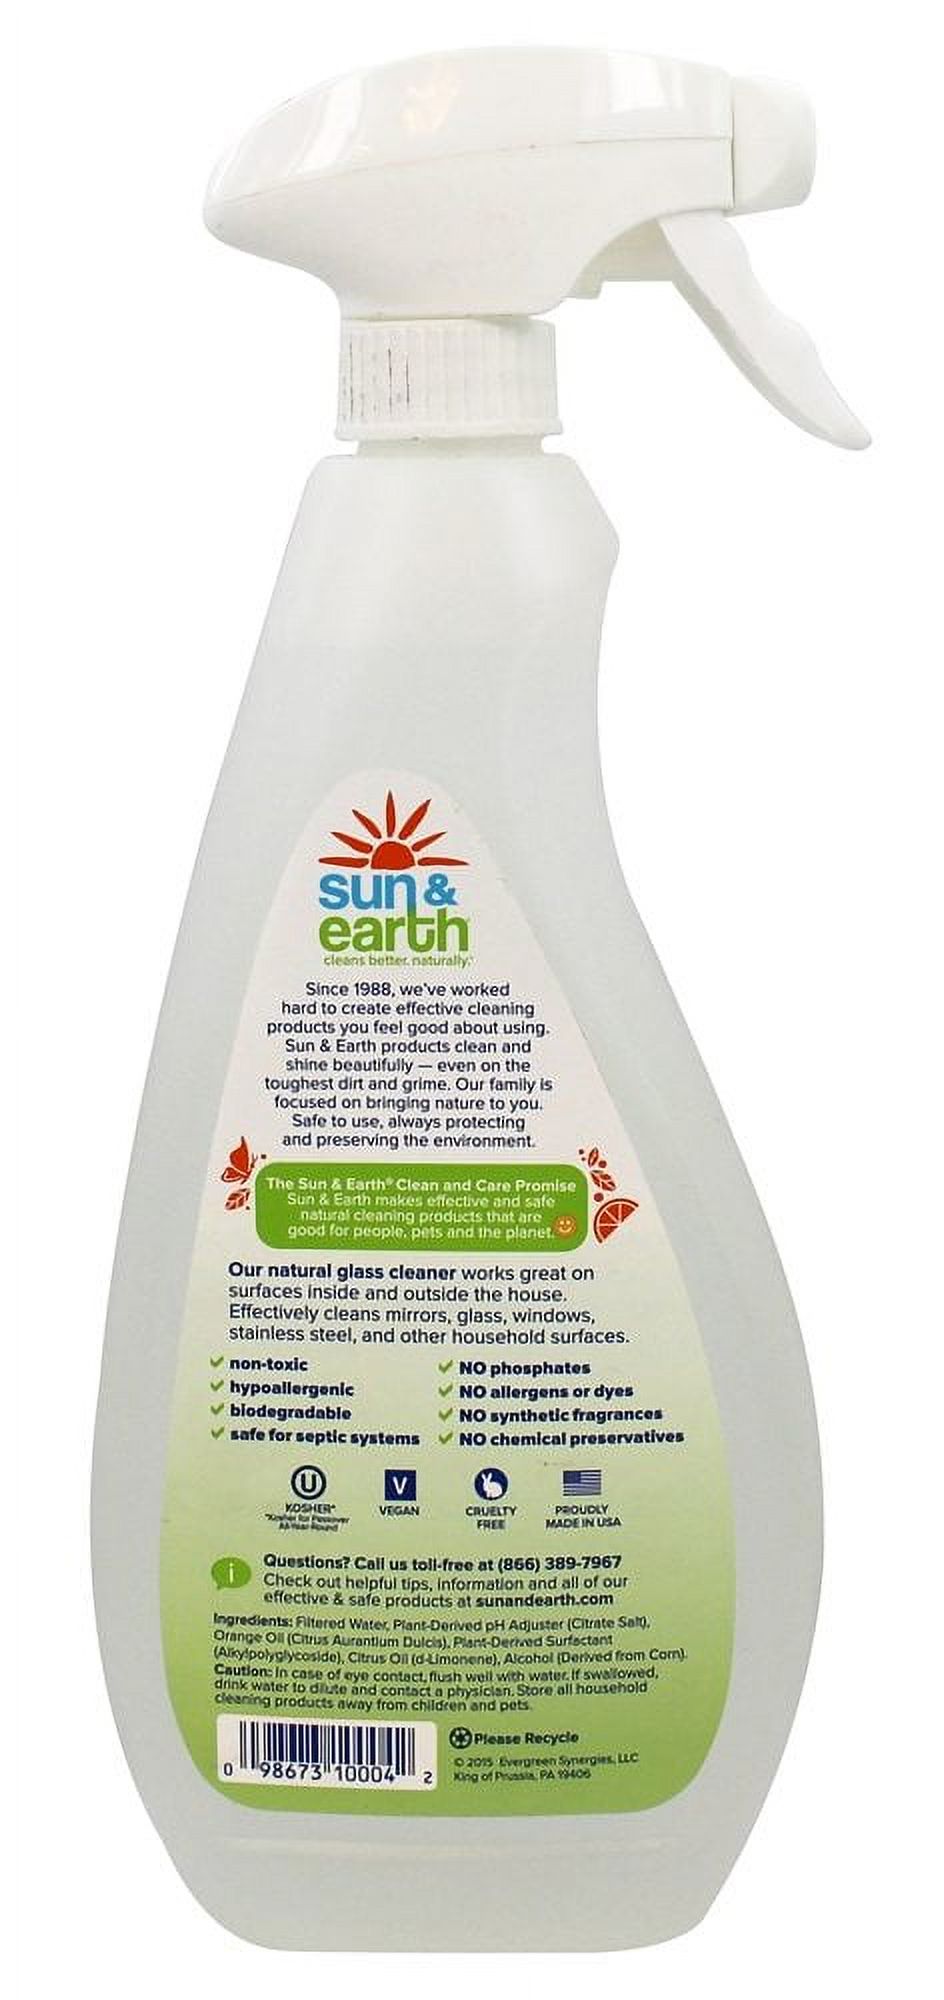 Sun & Earth Glass Cleaner, 22 oz - image 2 of 2